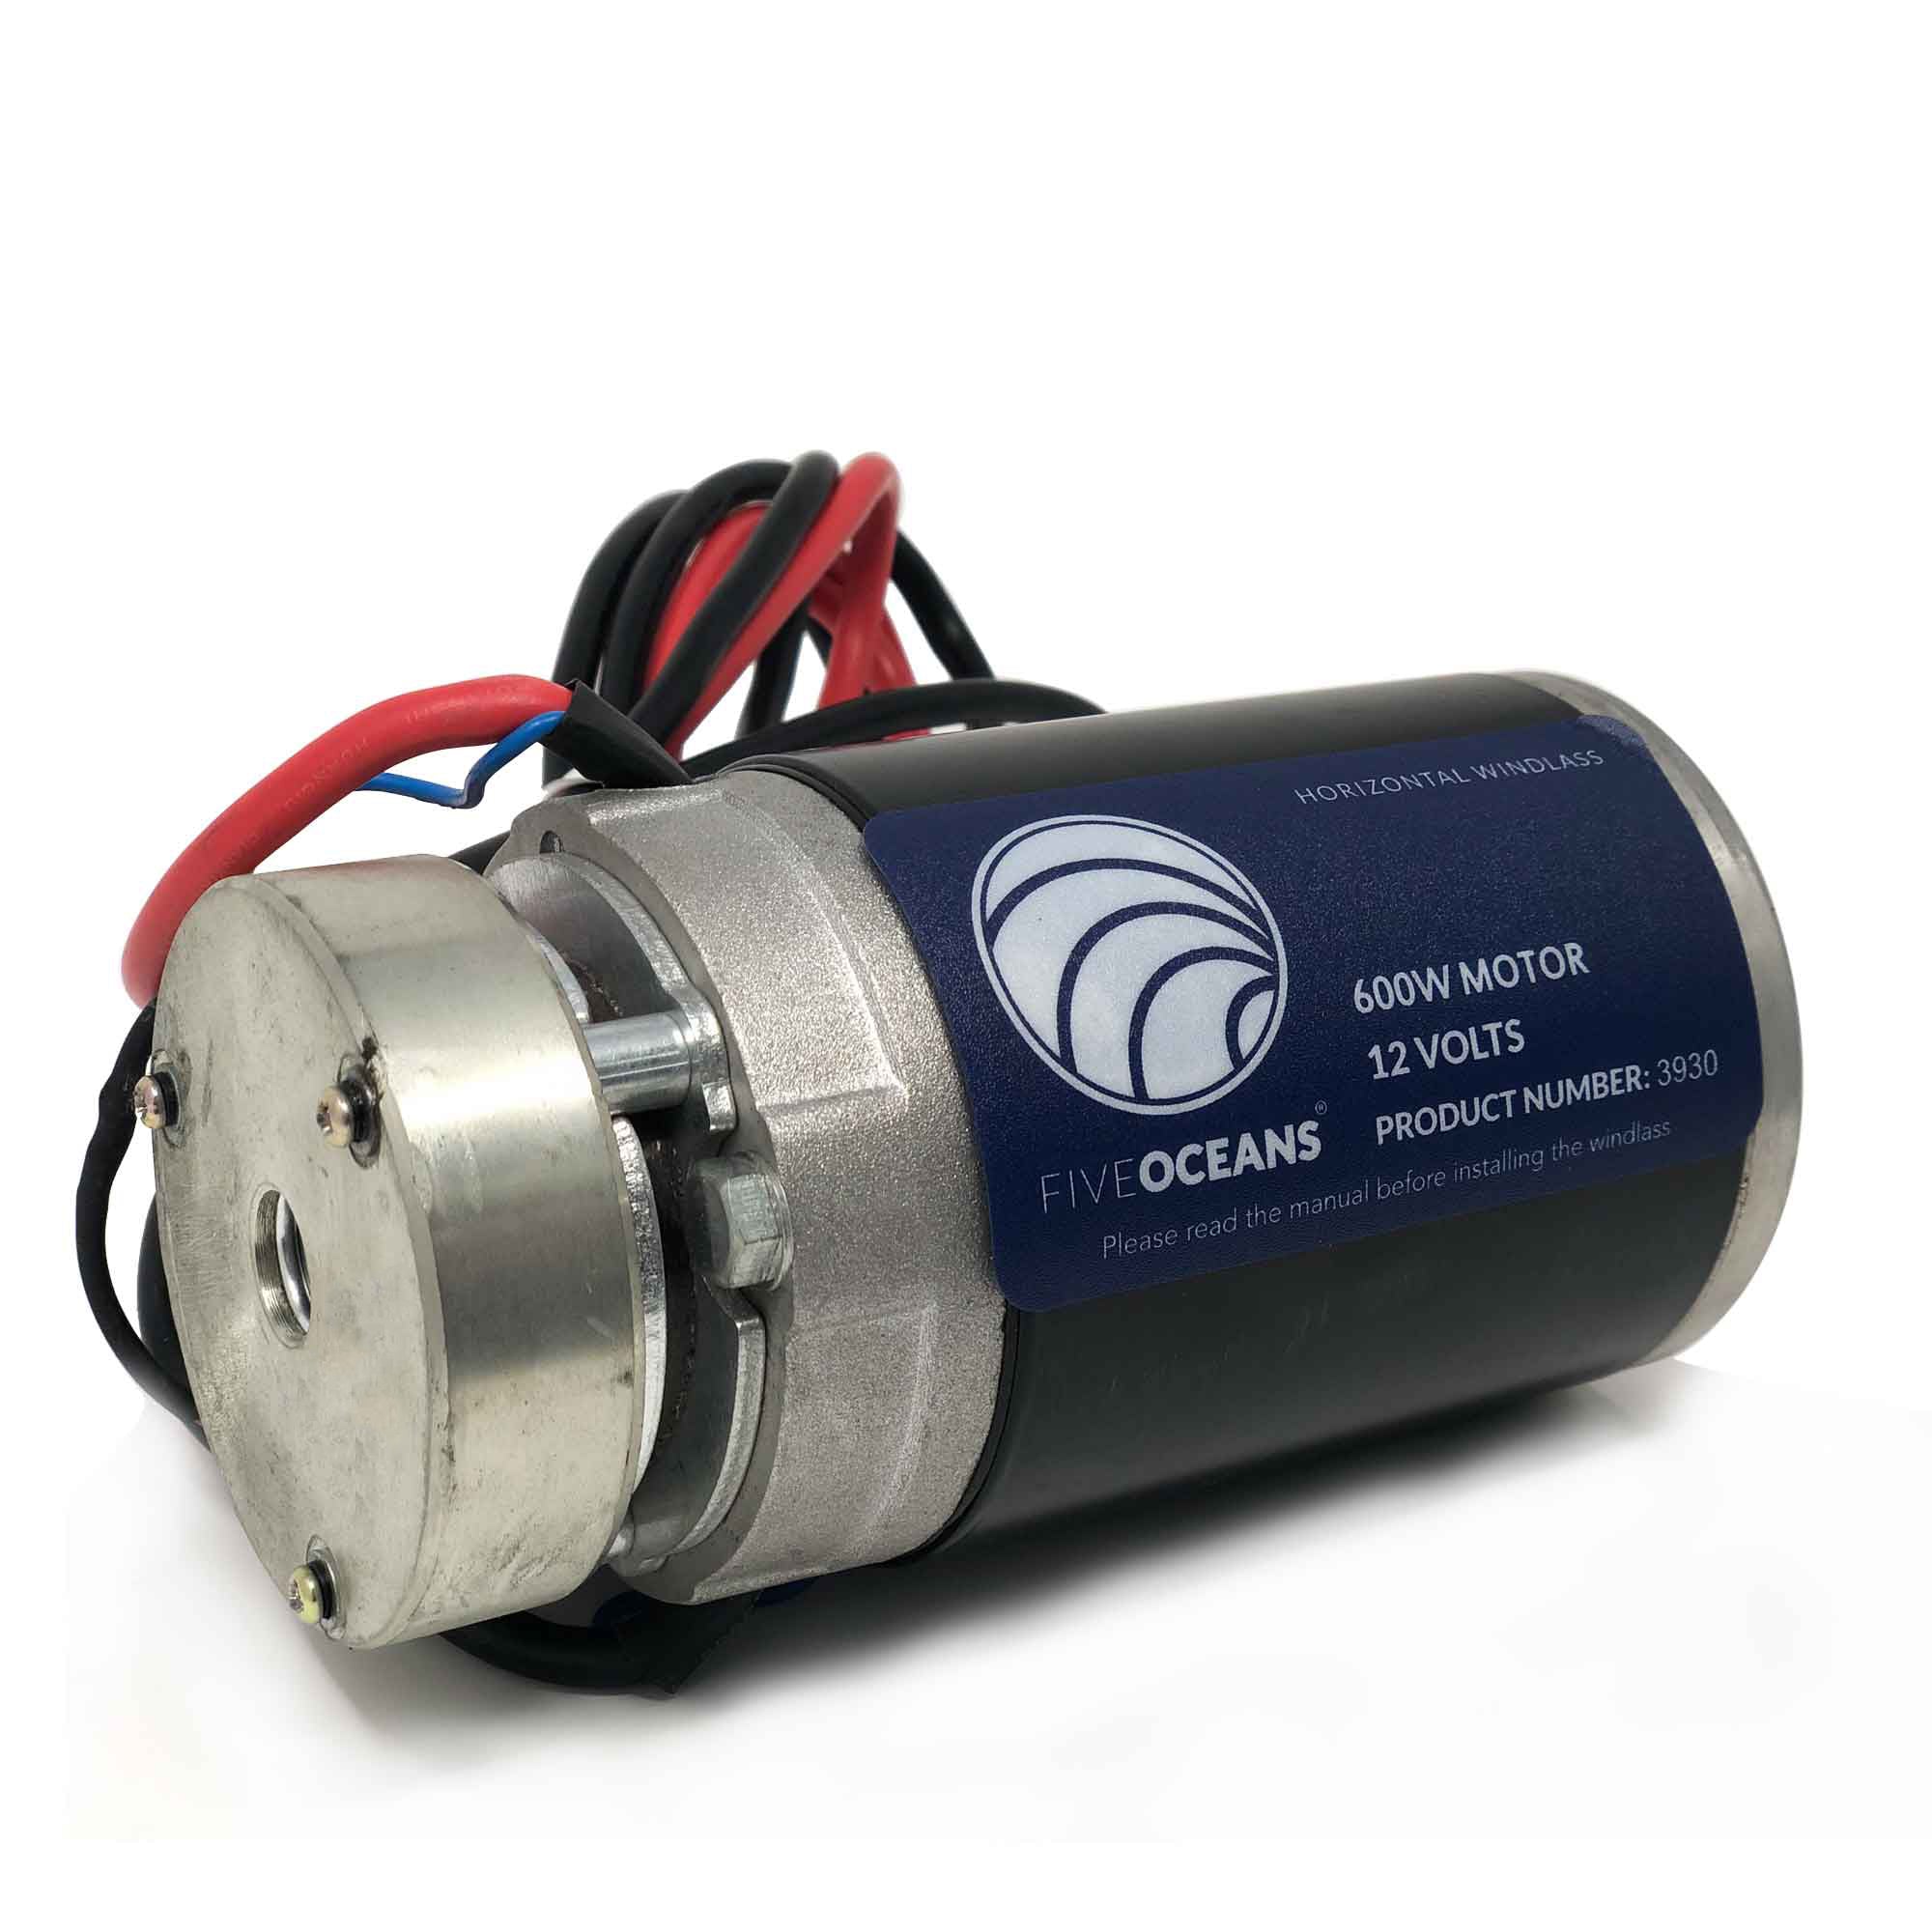 Replacement Motor for Atlantic 600 (FO-3930) - FO4259